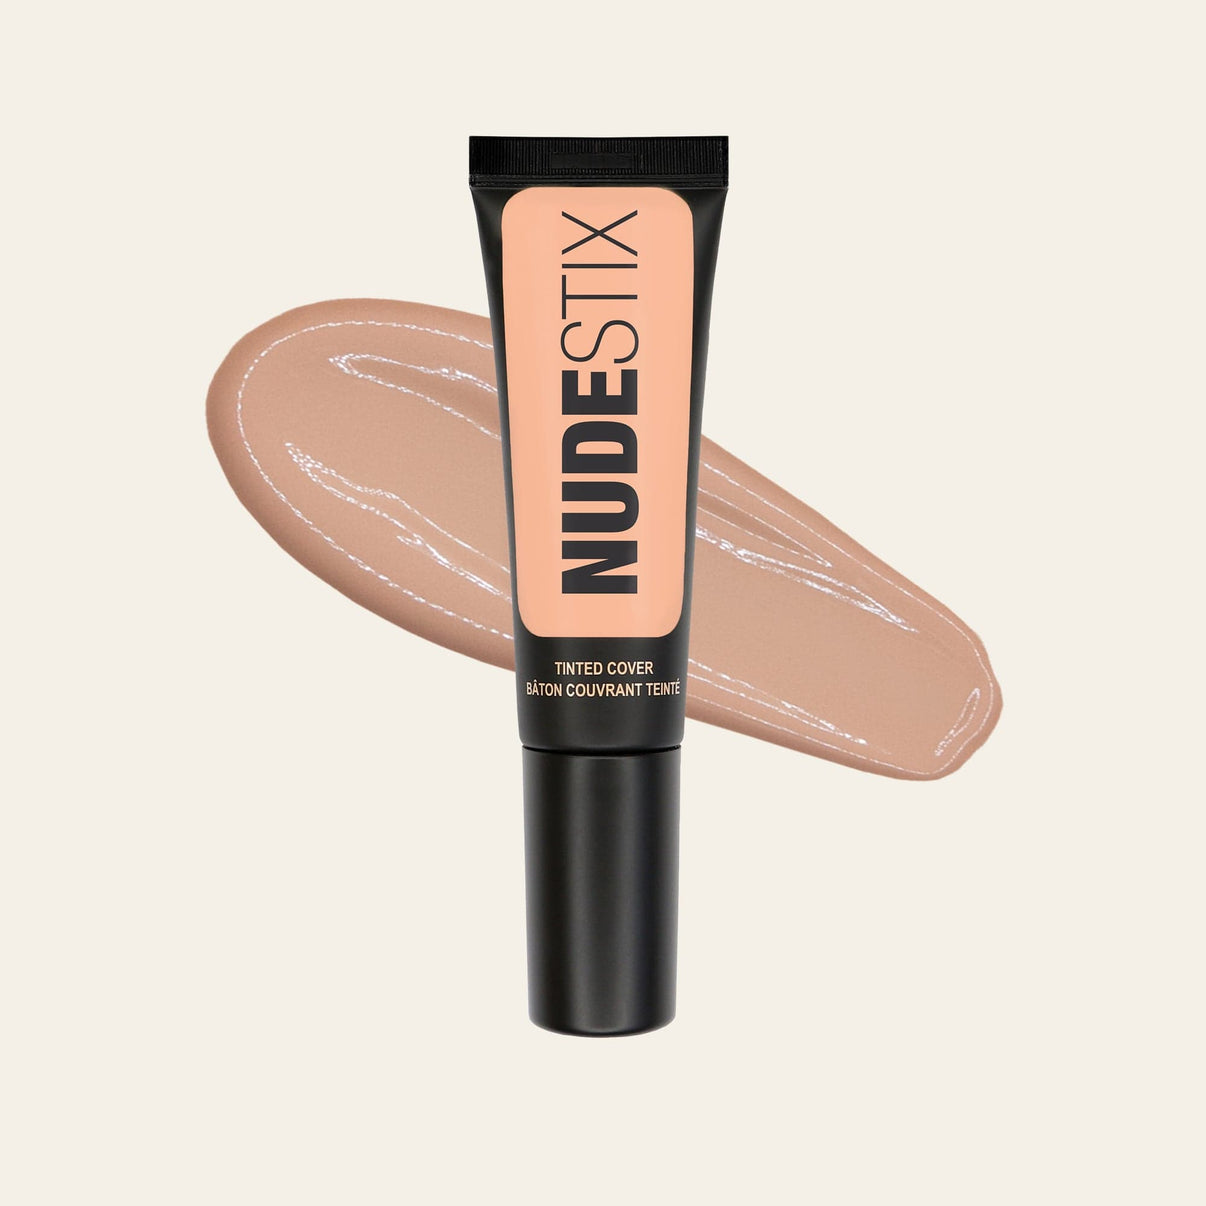 Tinted Cover Liquid Foundation in shade nude 3.5